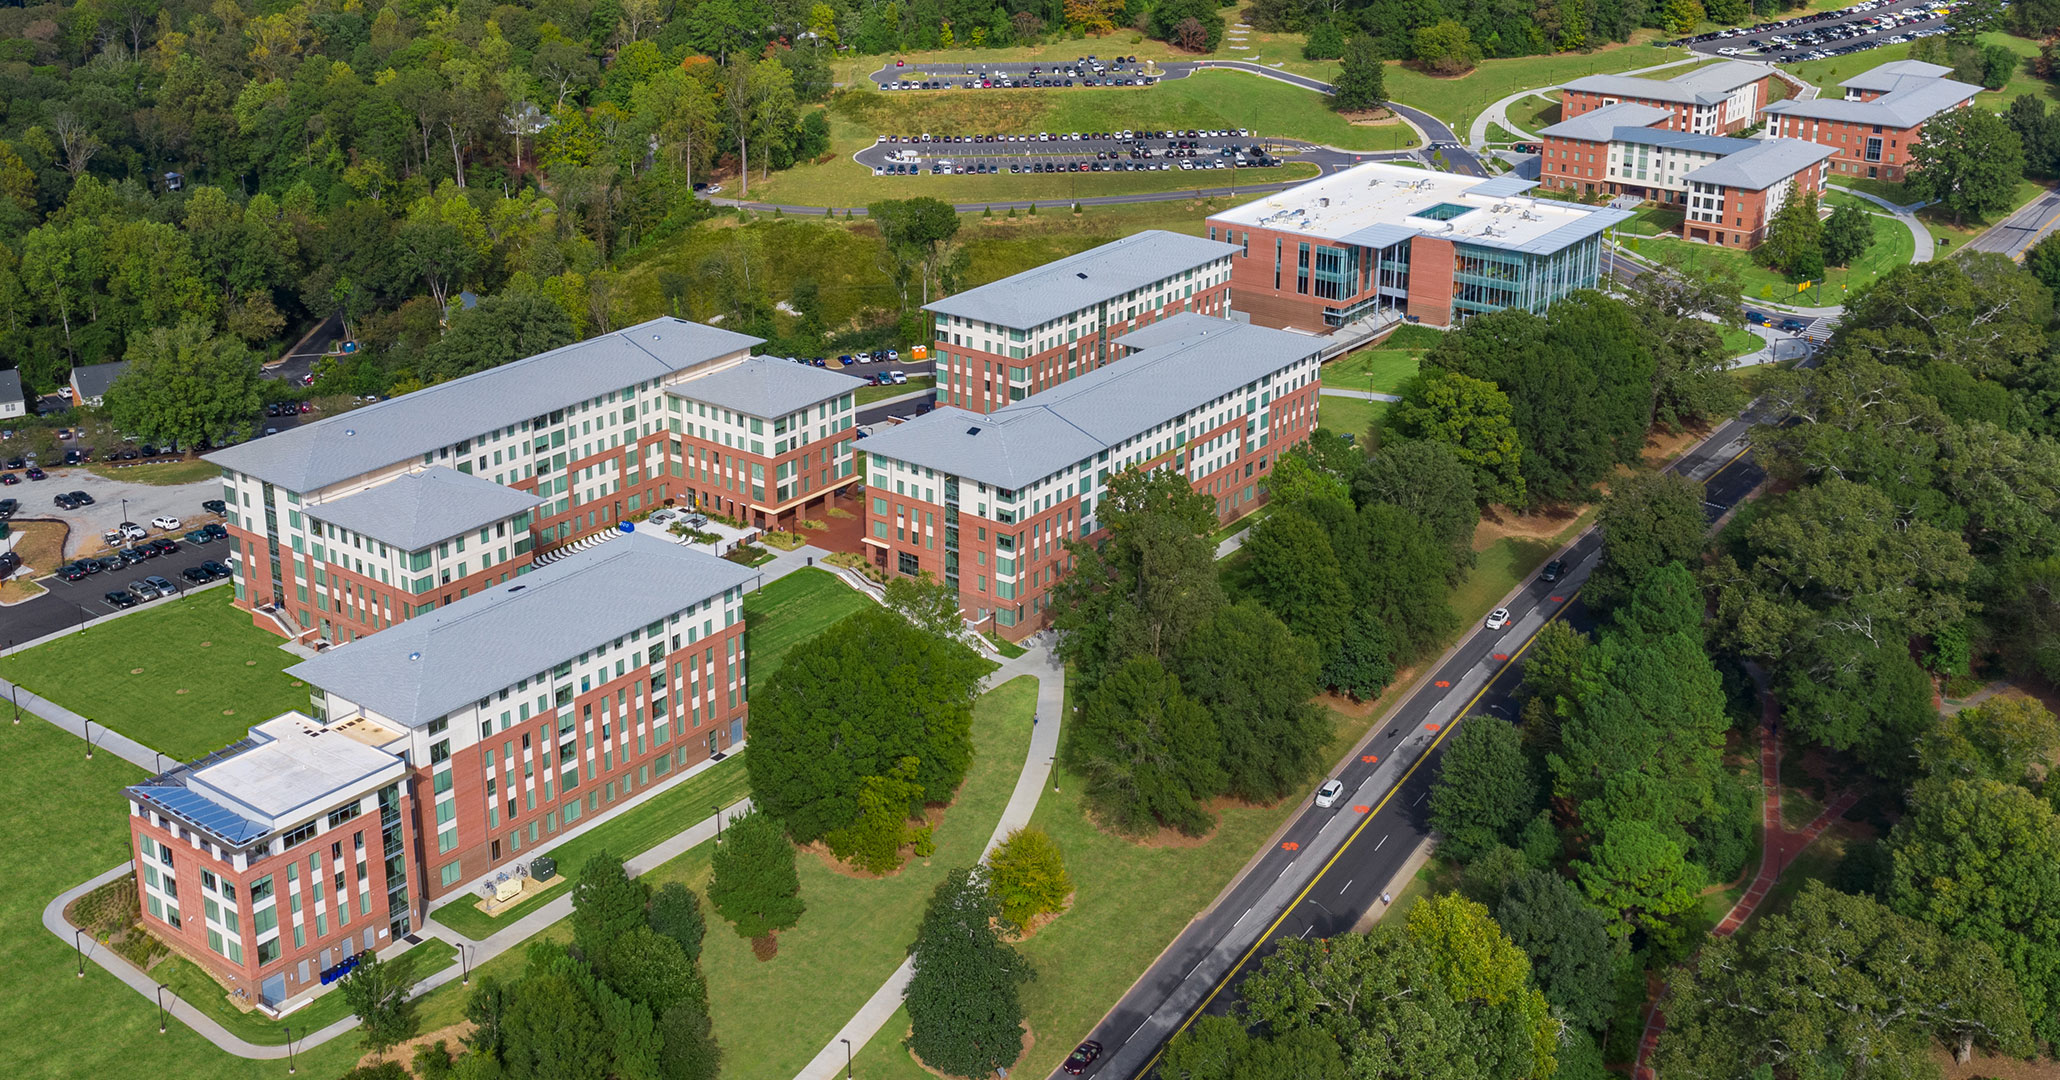 Boudreaux architects worked with Clemson University to incorporate Douthit Hills Student Hub into the campus landscape.